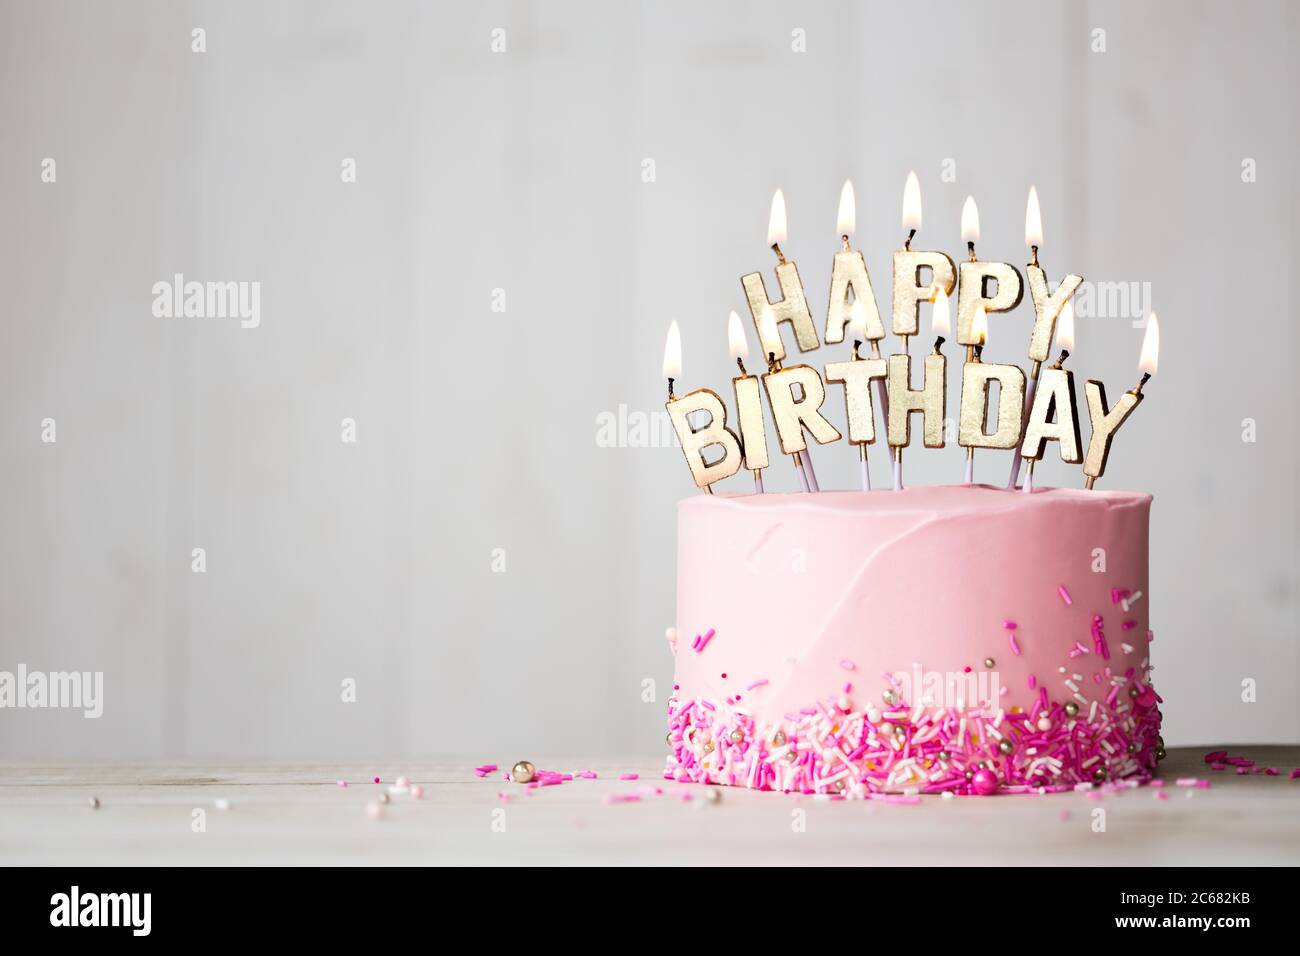 Pink birthday cake with gold happy birthday candles Stock Photo